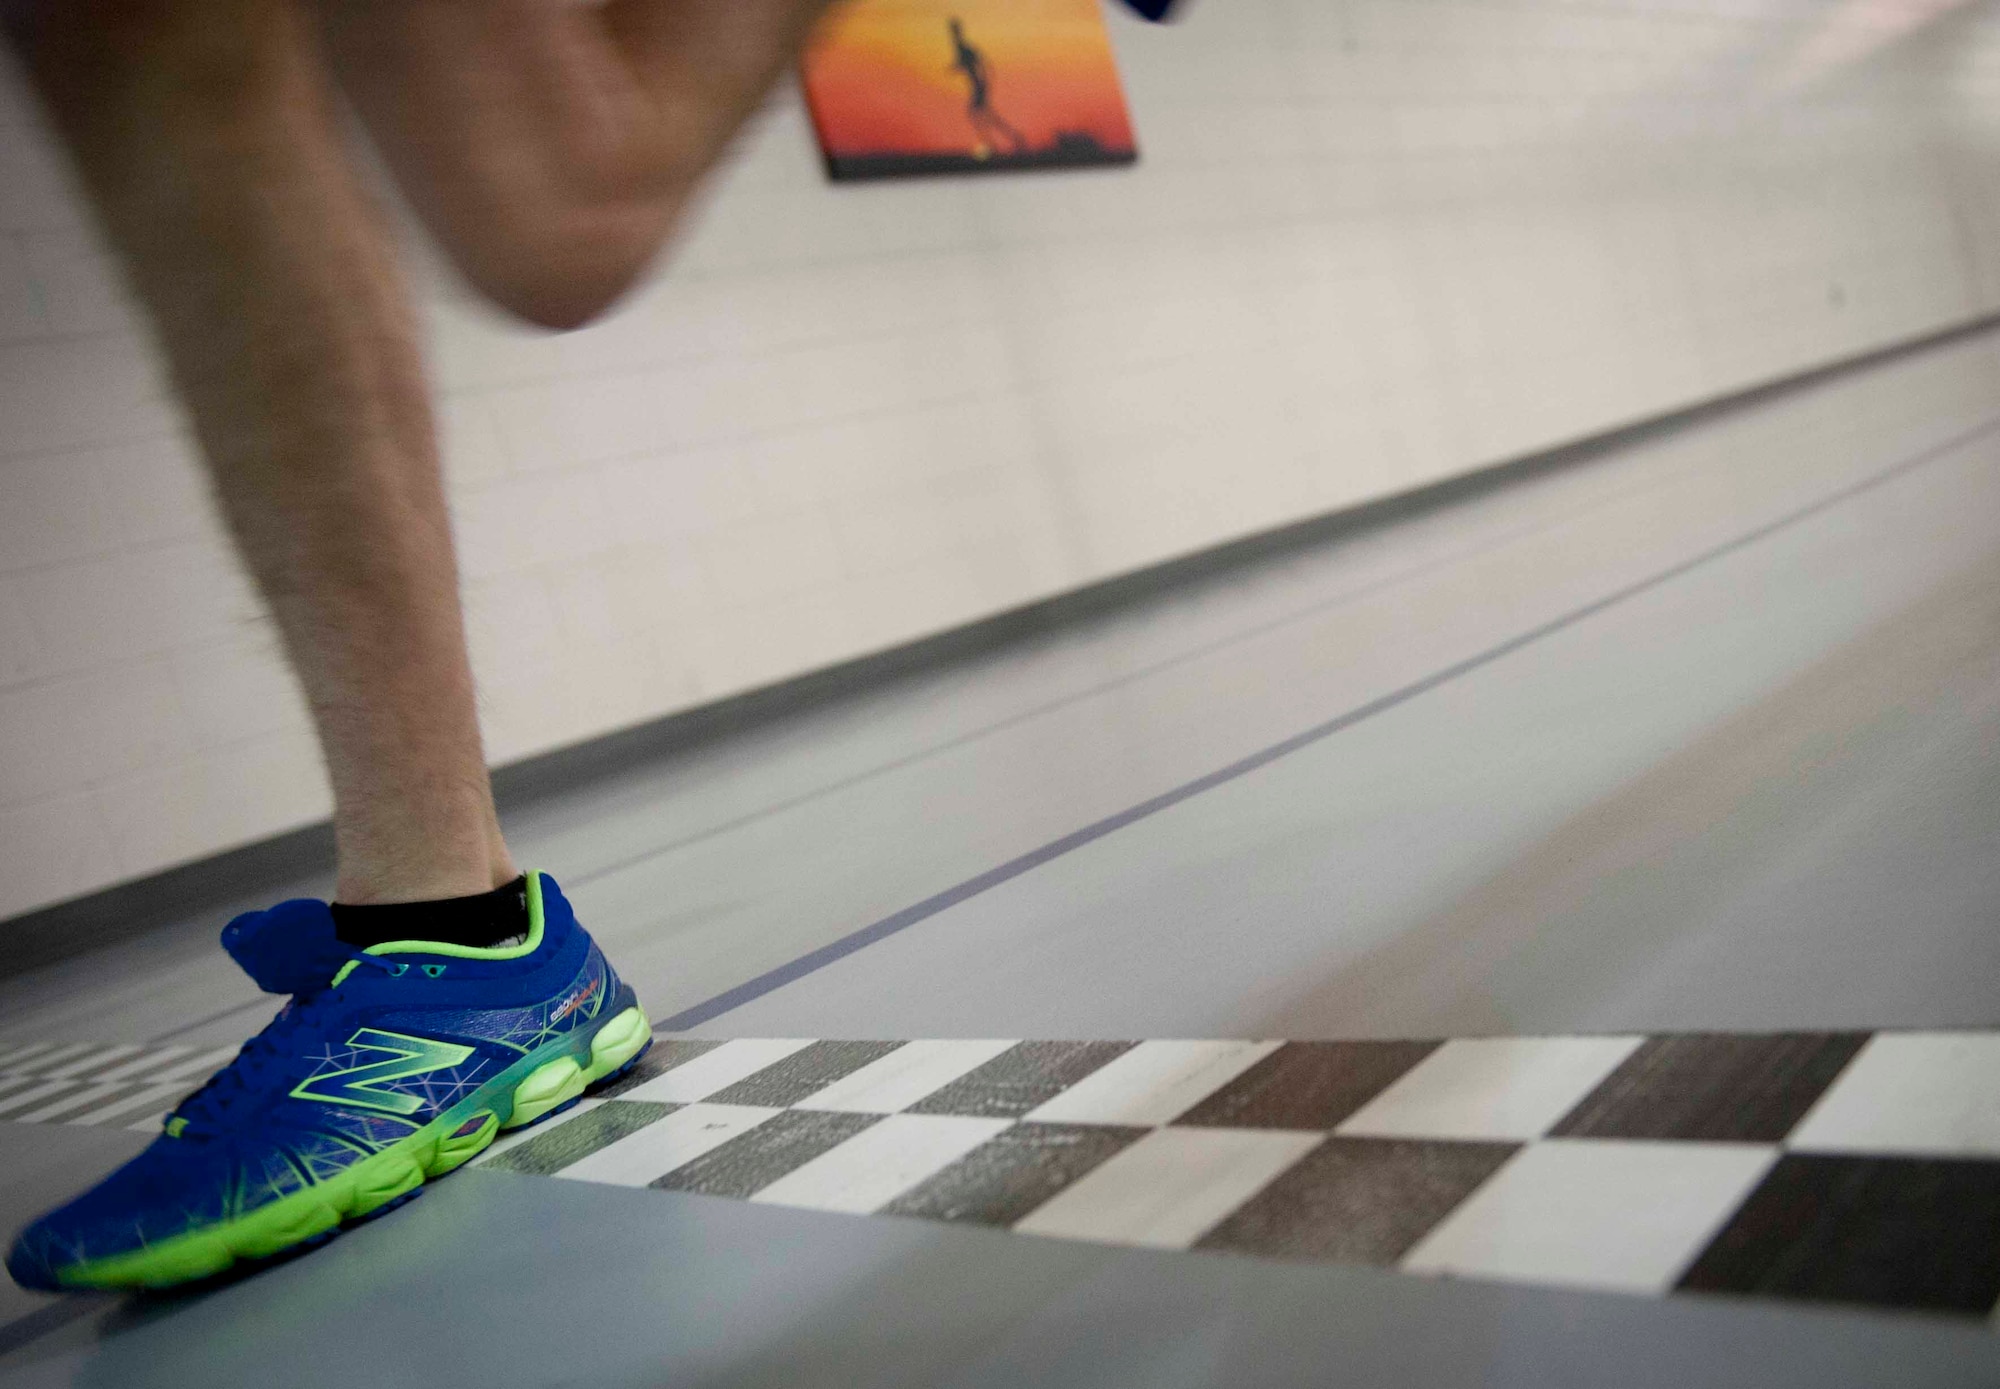 Airman 1st Class Augustin Sloan, personnelist from the 5th Force Support Squadron, crosses the finish line at the McAdoo Fitness Center on Minot Air Force Base, N.D. Feb. 11, 2015. Sloan was selected to be a member of the Air Force Cross Country team, however was unable to participate this season. He intends on trying out for the team in 2016. (U.S. Air Force photo/Airman 1st Class Sahara L. Fales)